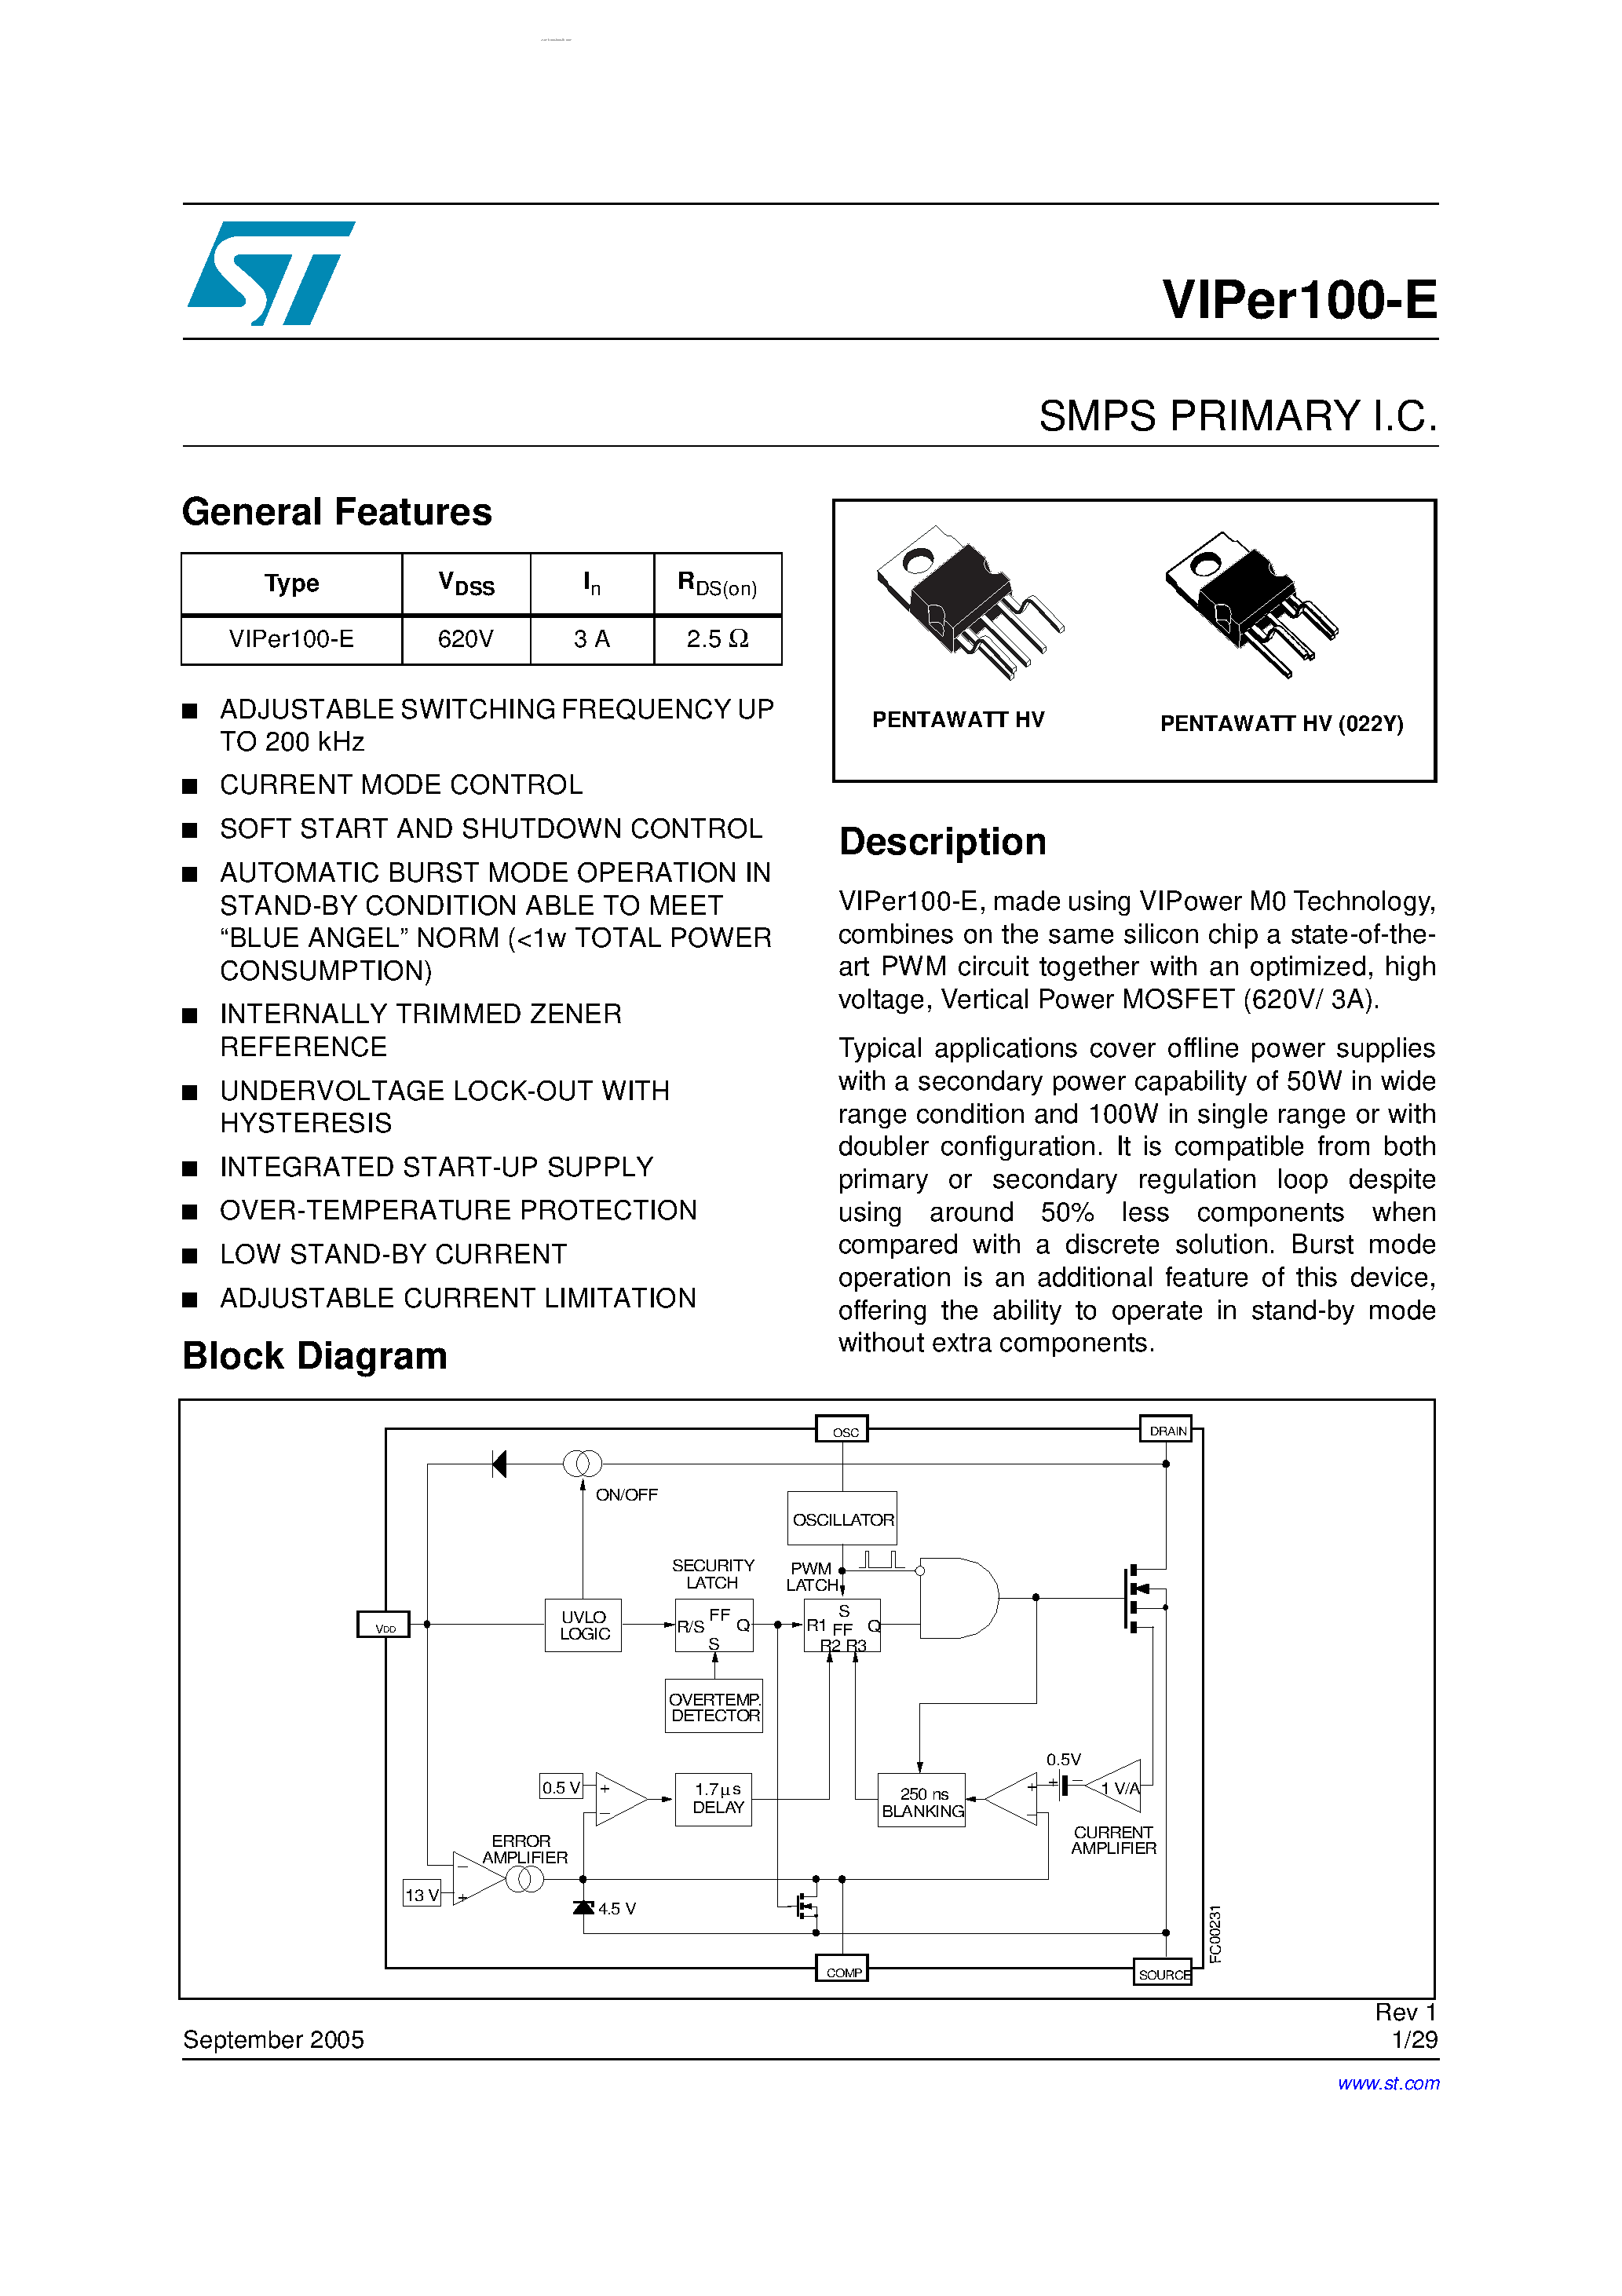 Datasheet VIPER100-E - SMPS PRIMARY I.C. page 1